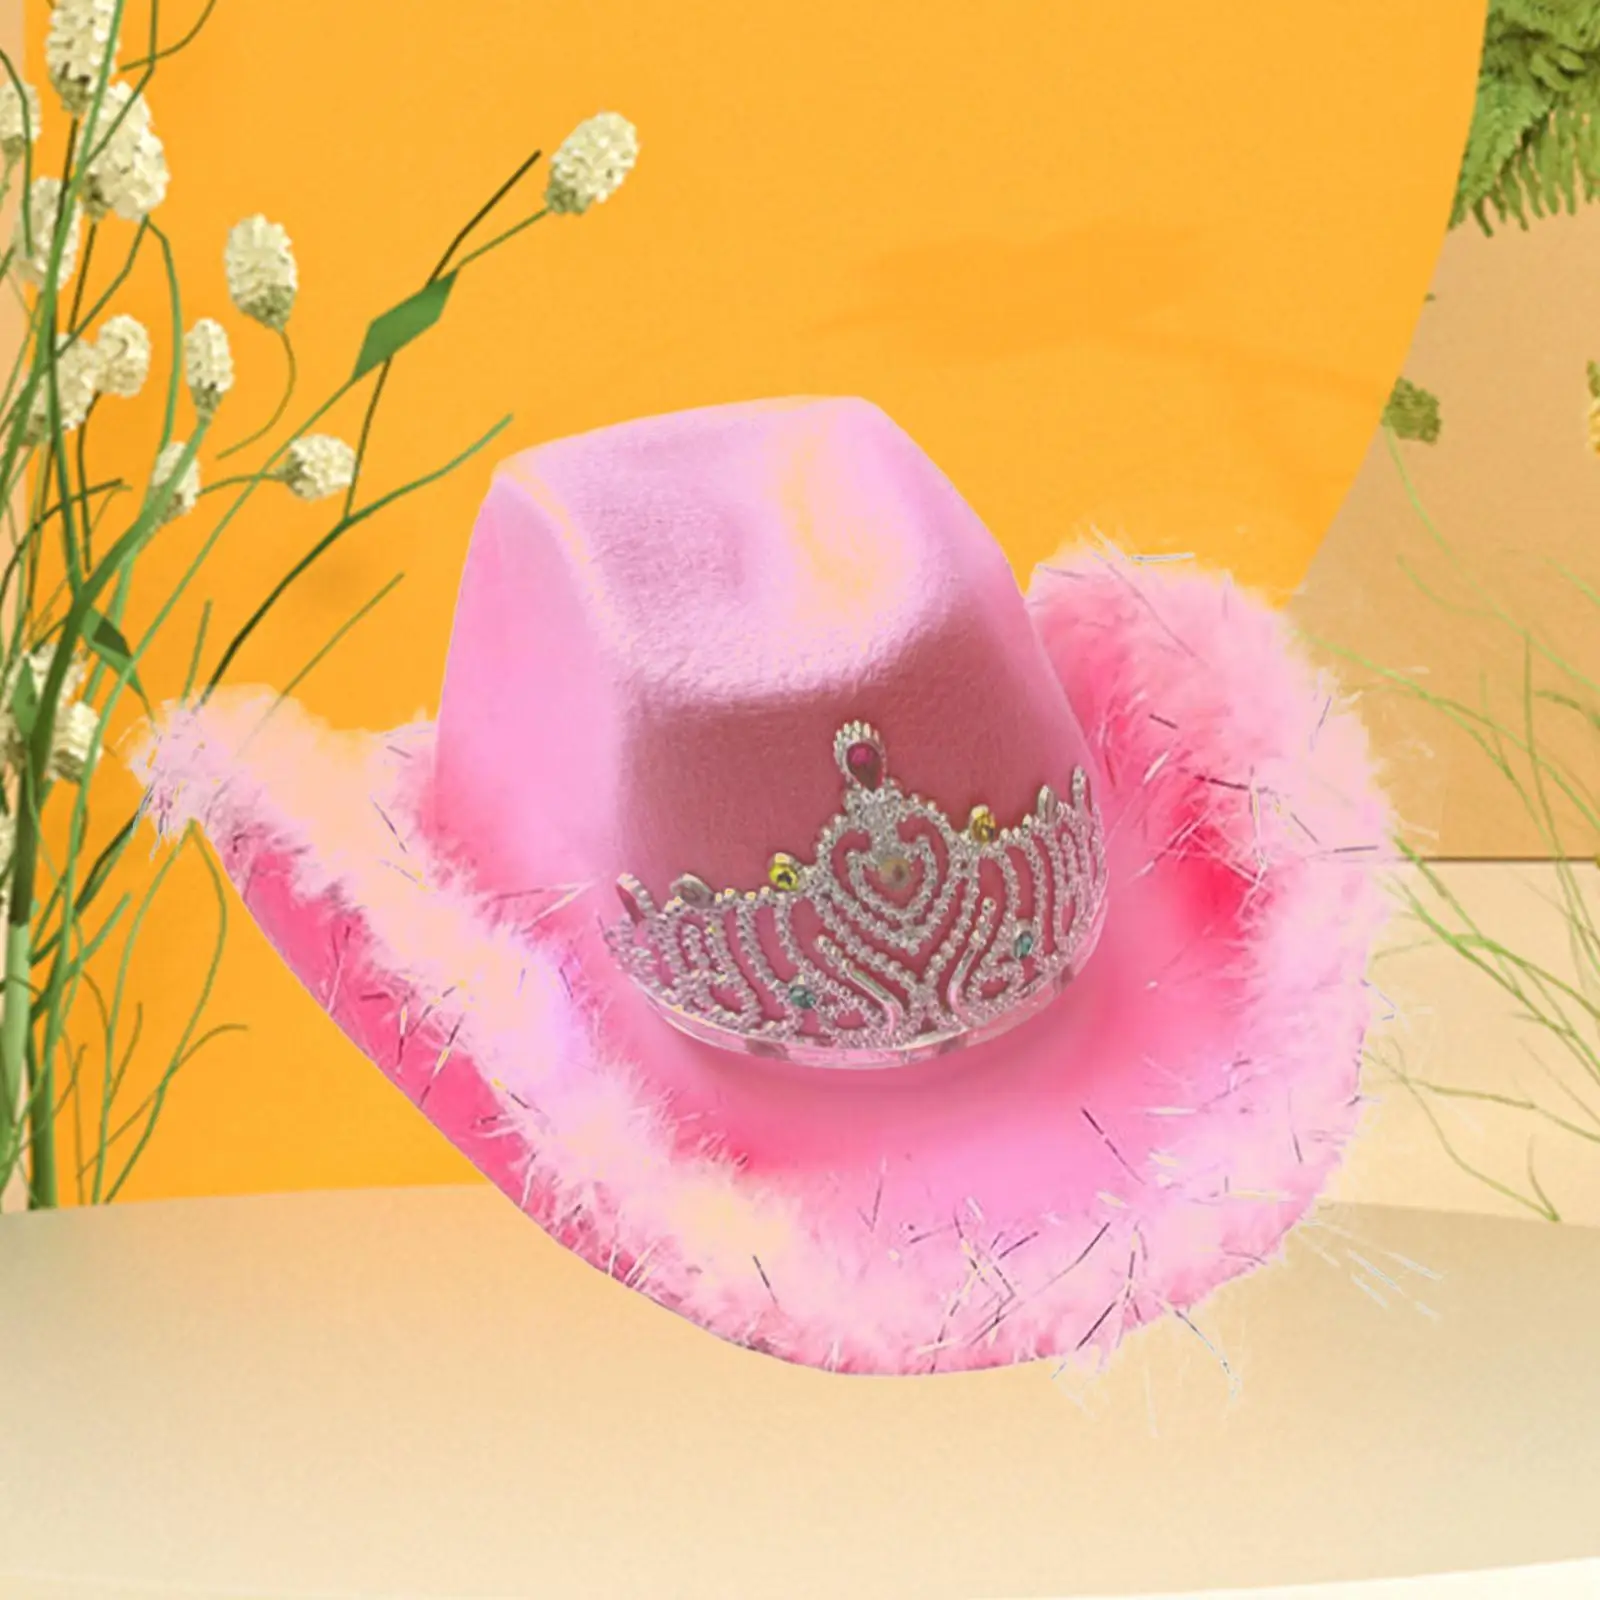 Light up Pink Cowboy Hat with Crown One Size Fits Most Wide Brim for Party Fancy Dress Props Hen Night Party Costume Accessories